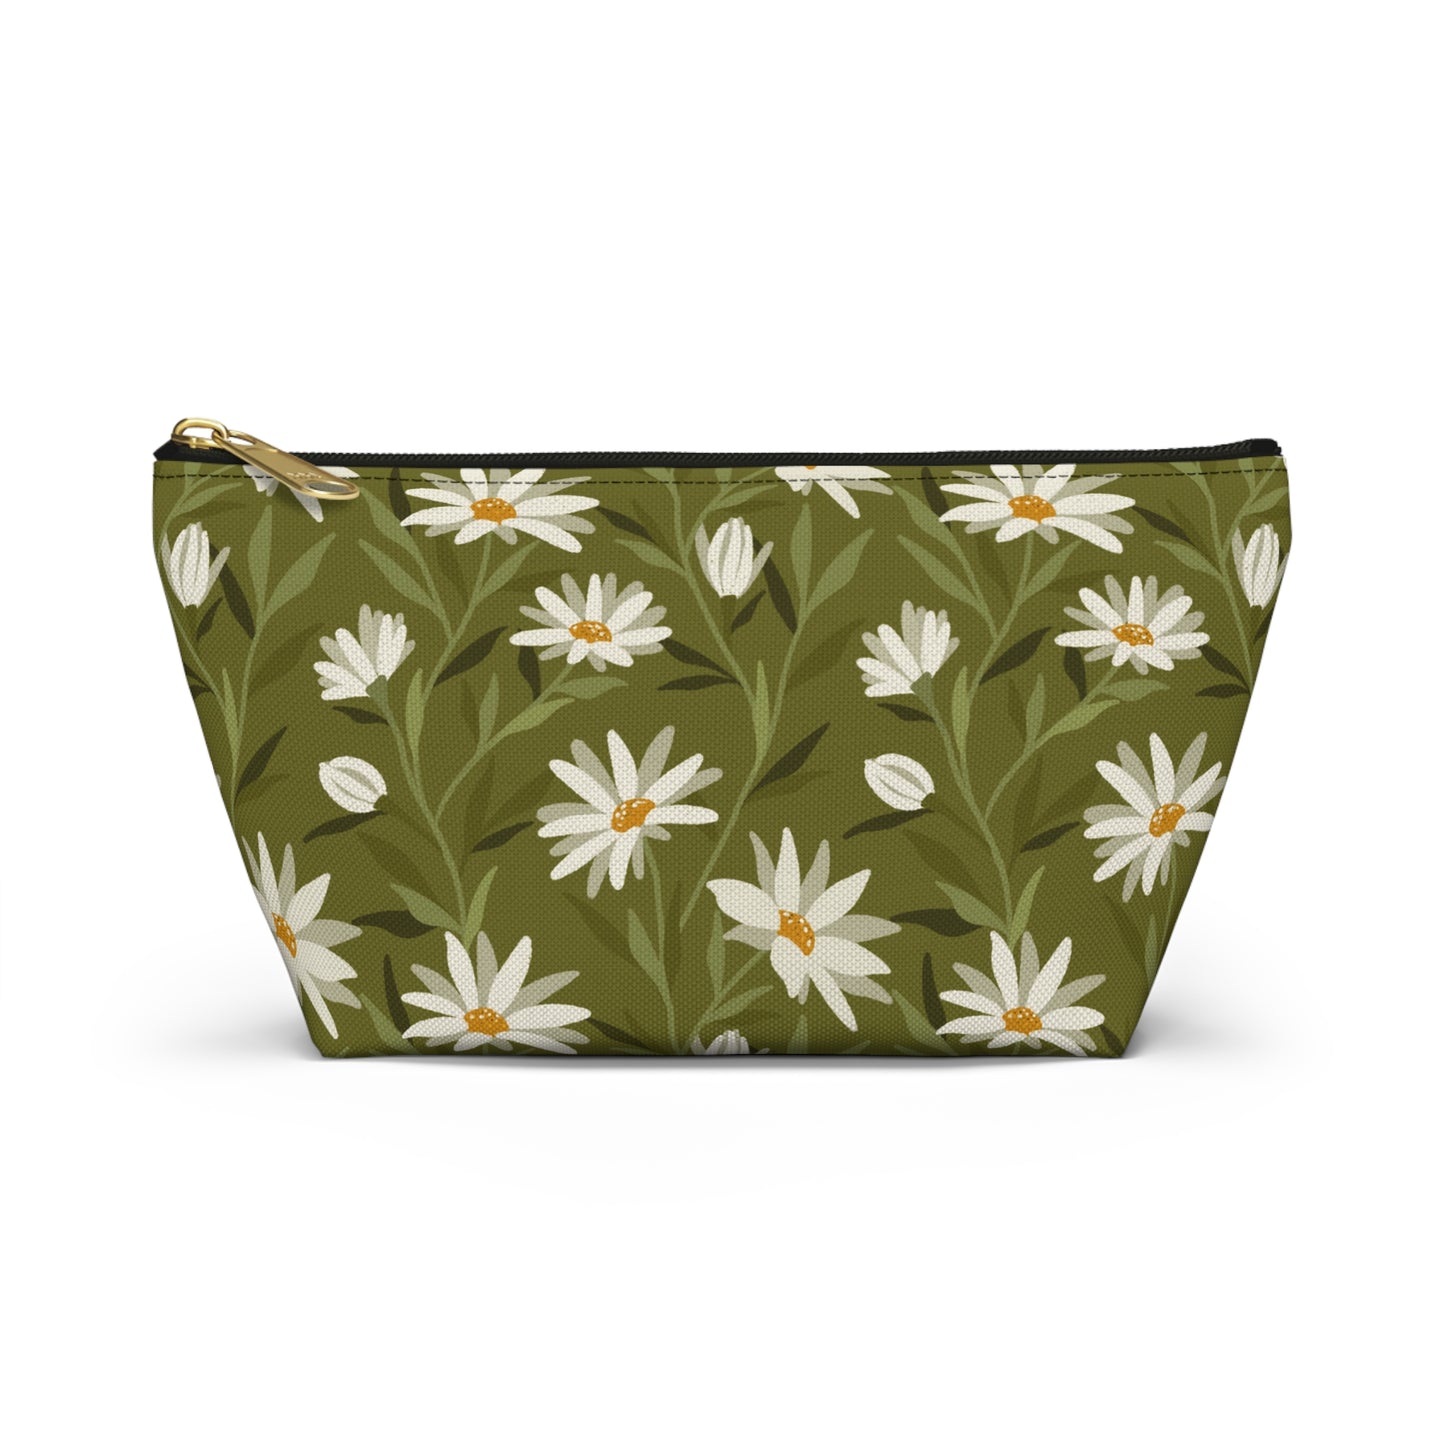 Zipper Pouch - Flowy Florals - green and white